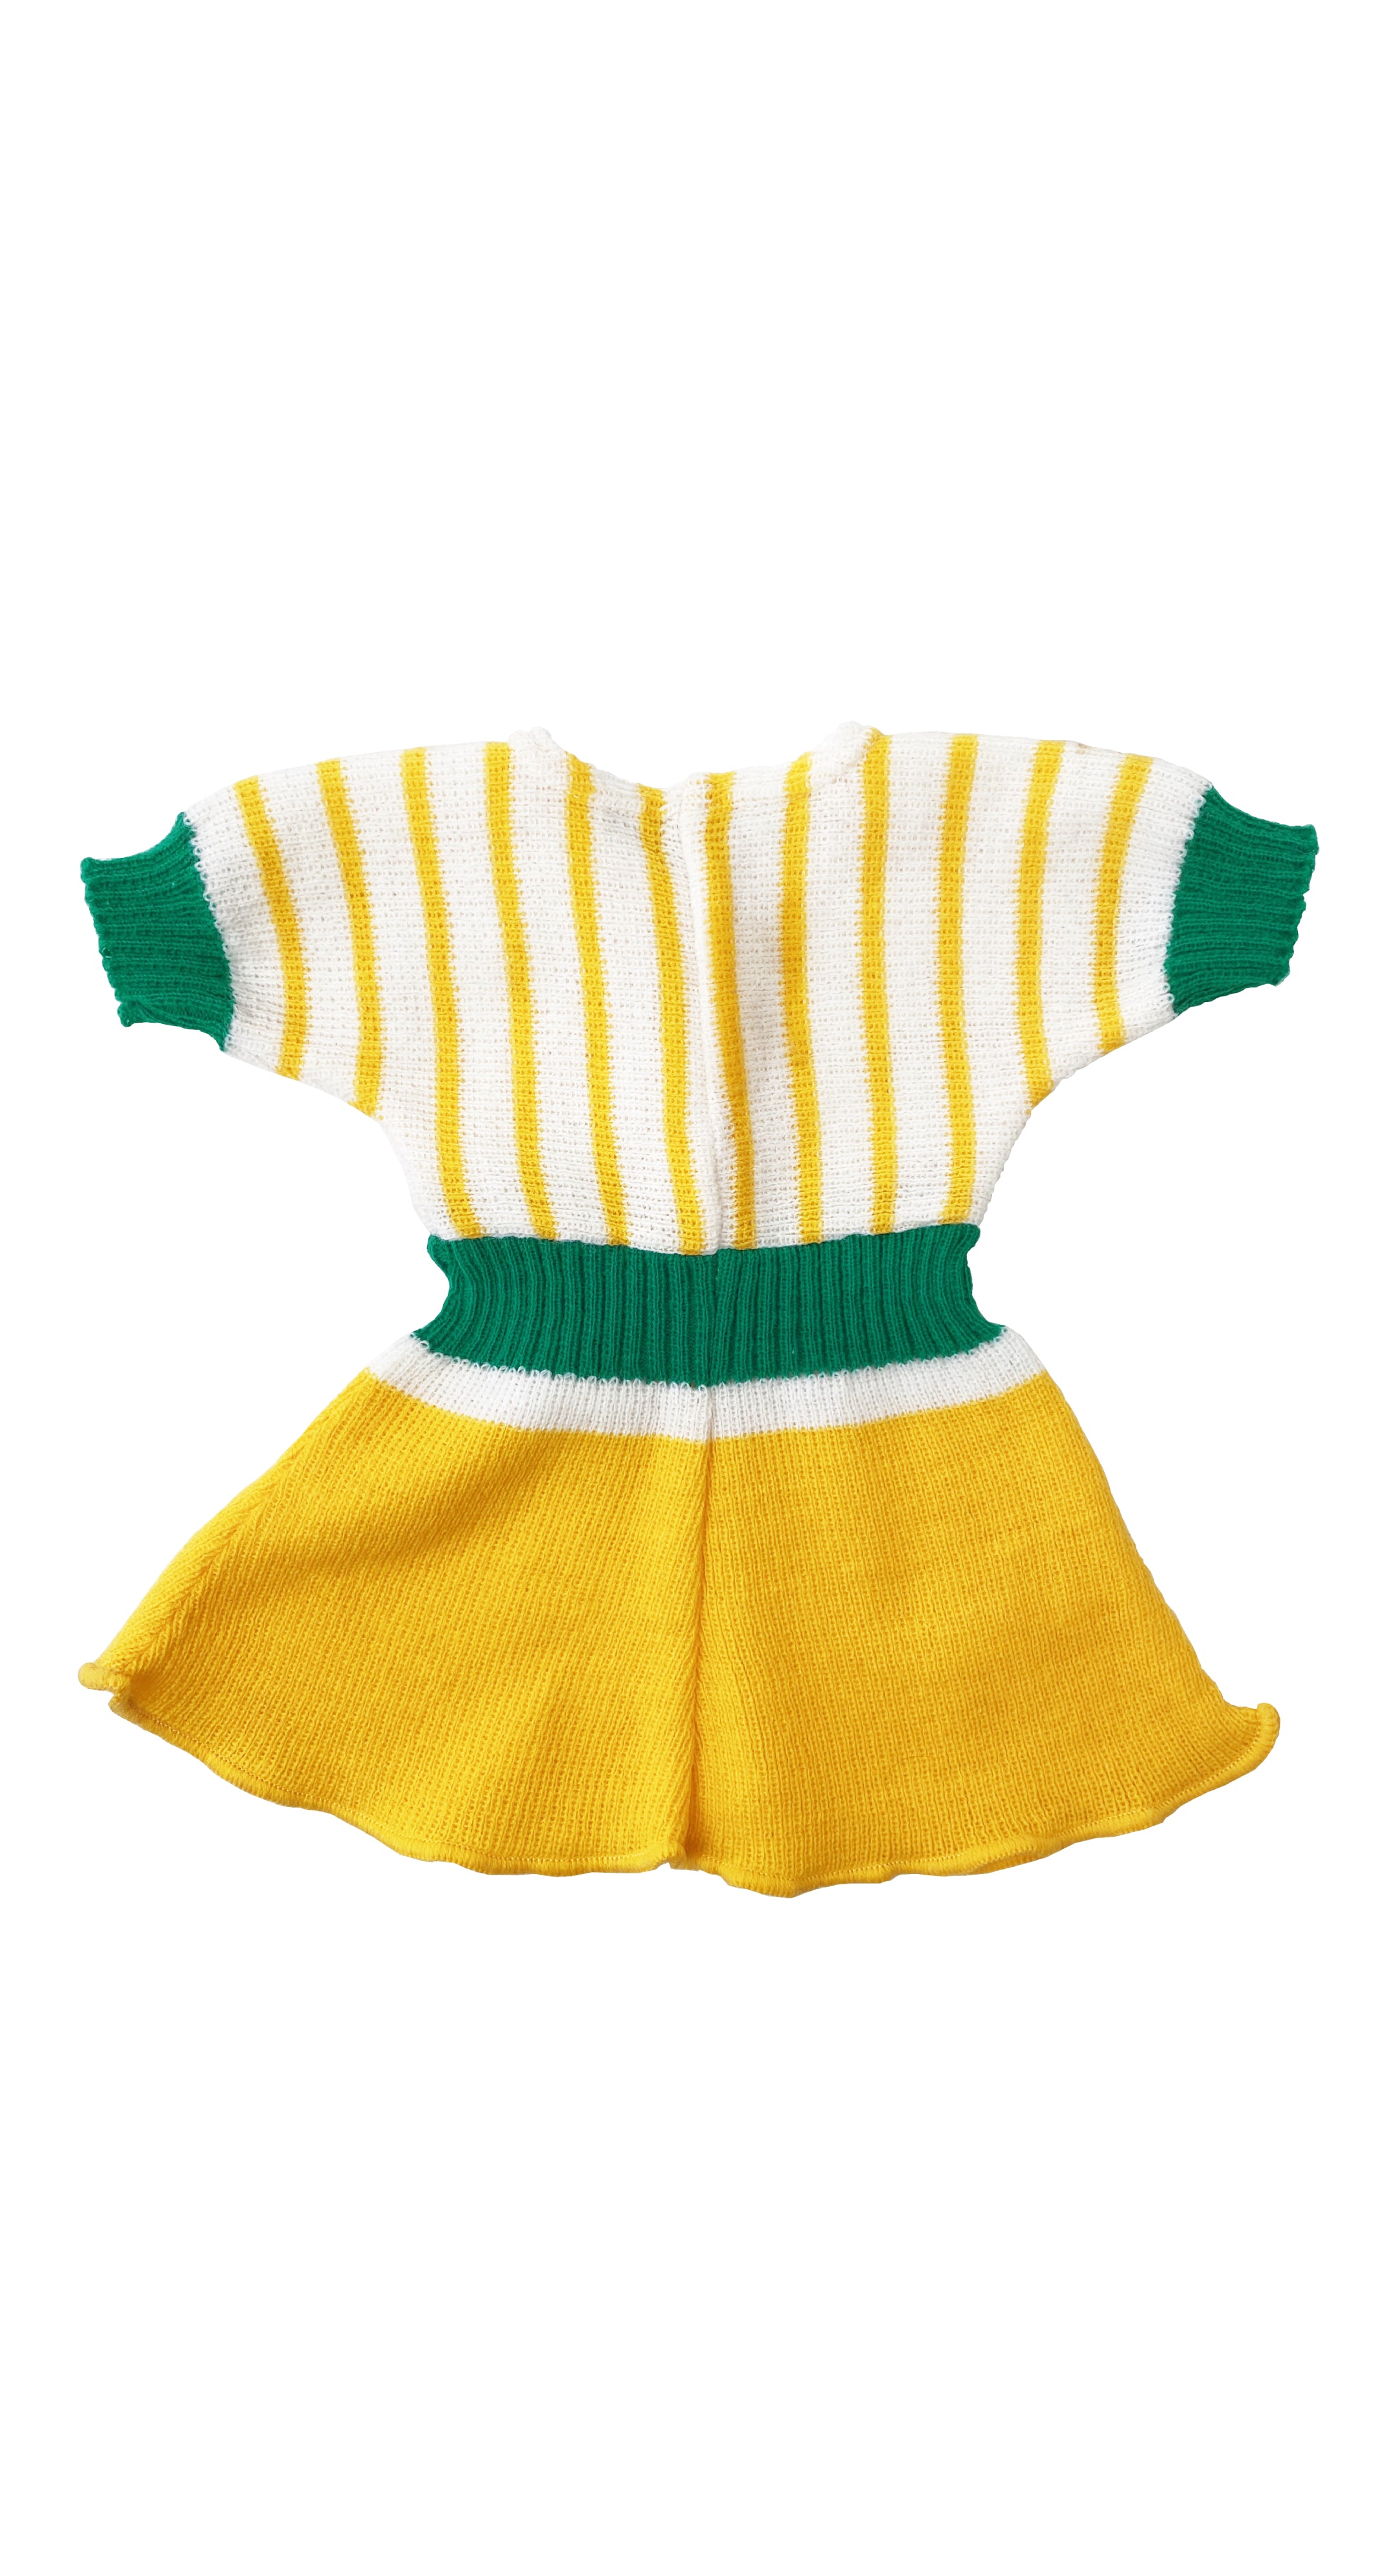 1970s NOS Girl's Yellow & Green Striped Knit Dress 3M